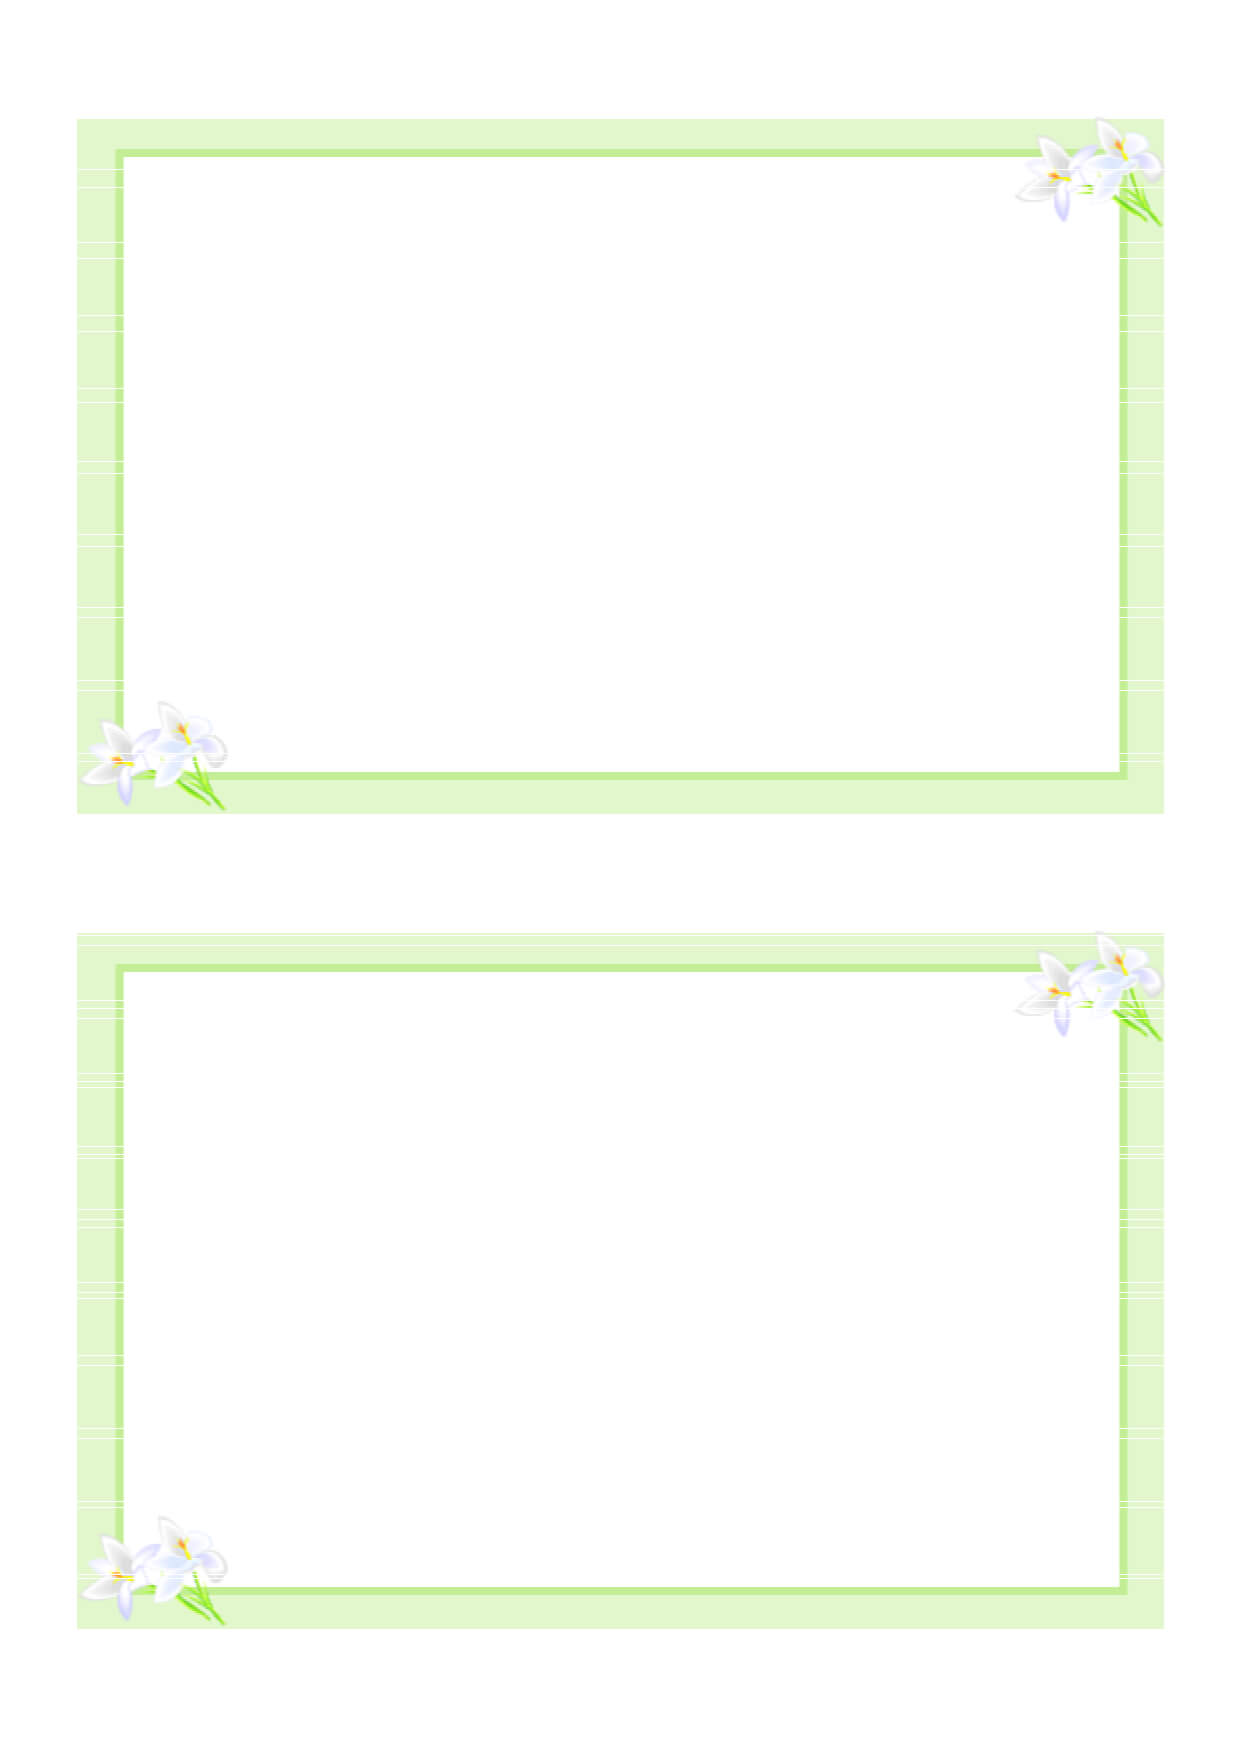 Blank Id Card Template Eliolera Com. 100 Free Blank Card Intended For Free Printable Blank Greeting Card Templates